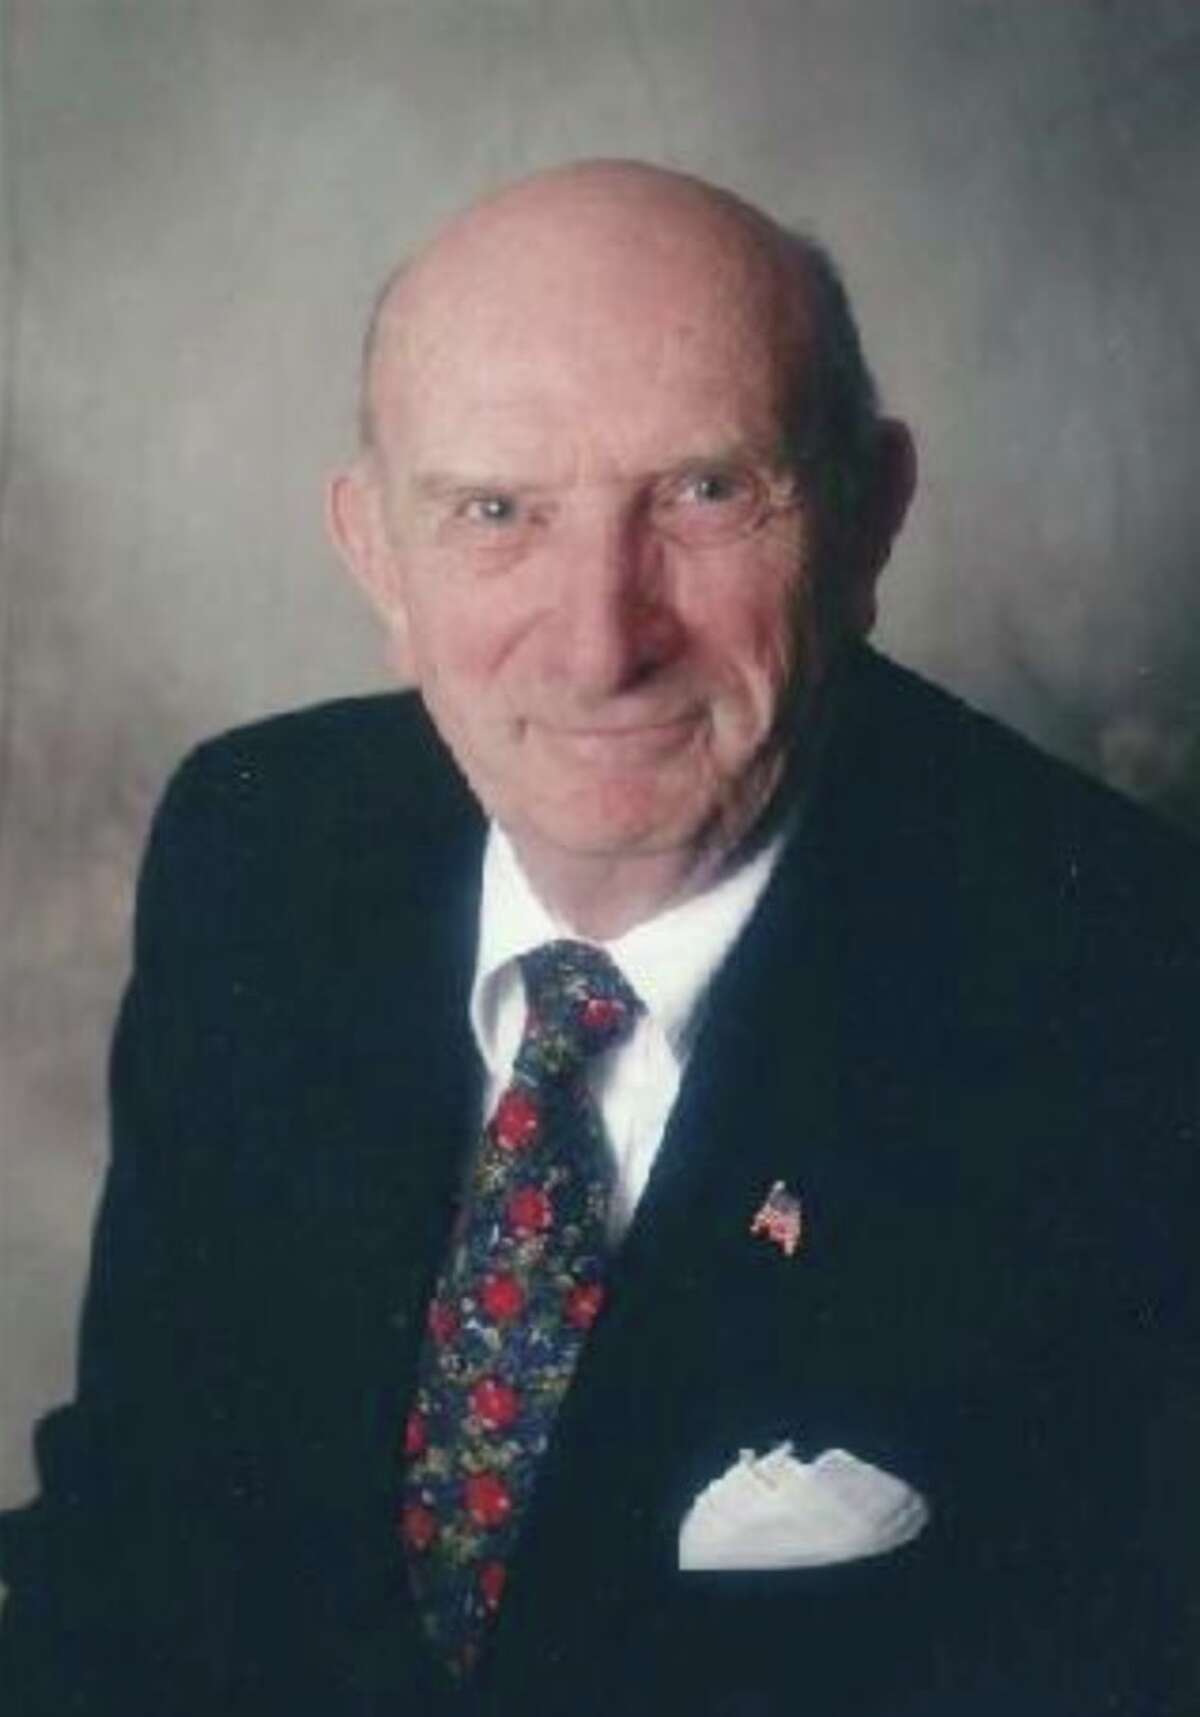 Longtime Proctors employee Edward J. Burke died on June 7, 2021 at the age of 93.